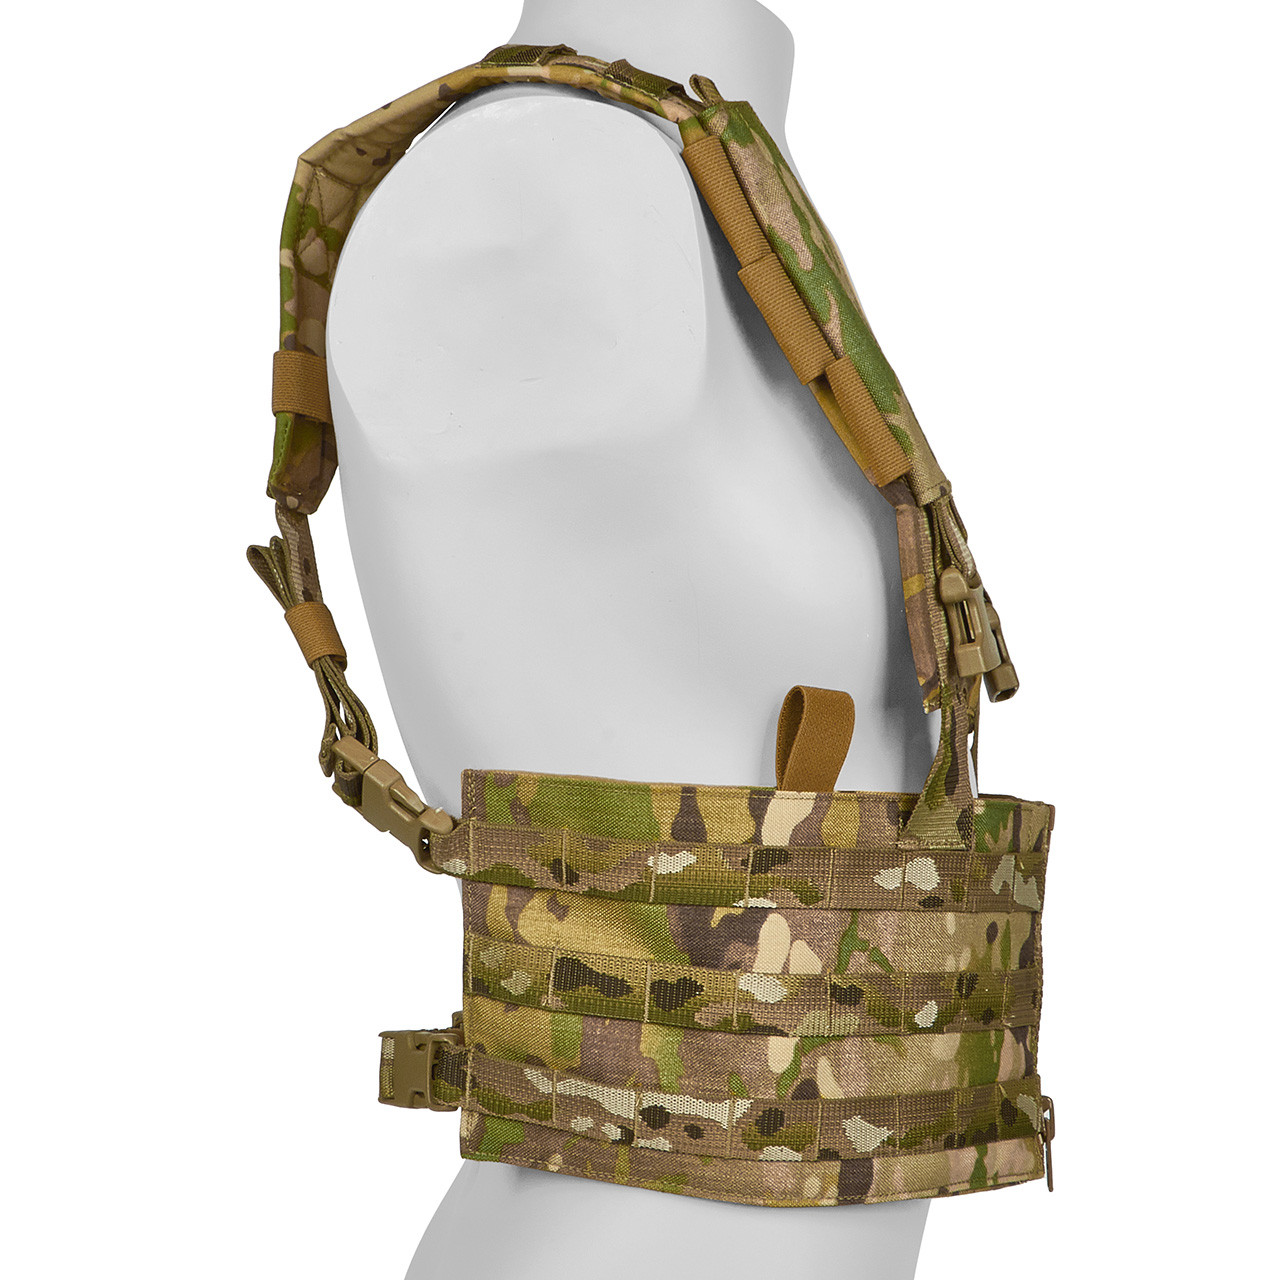 Chest Rig Front